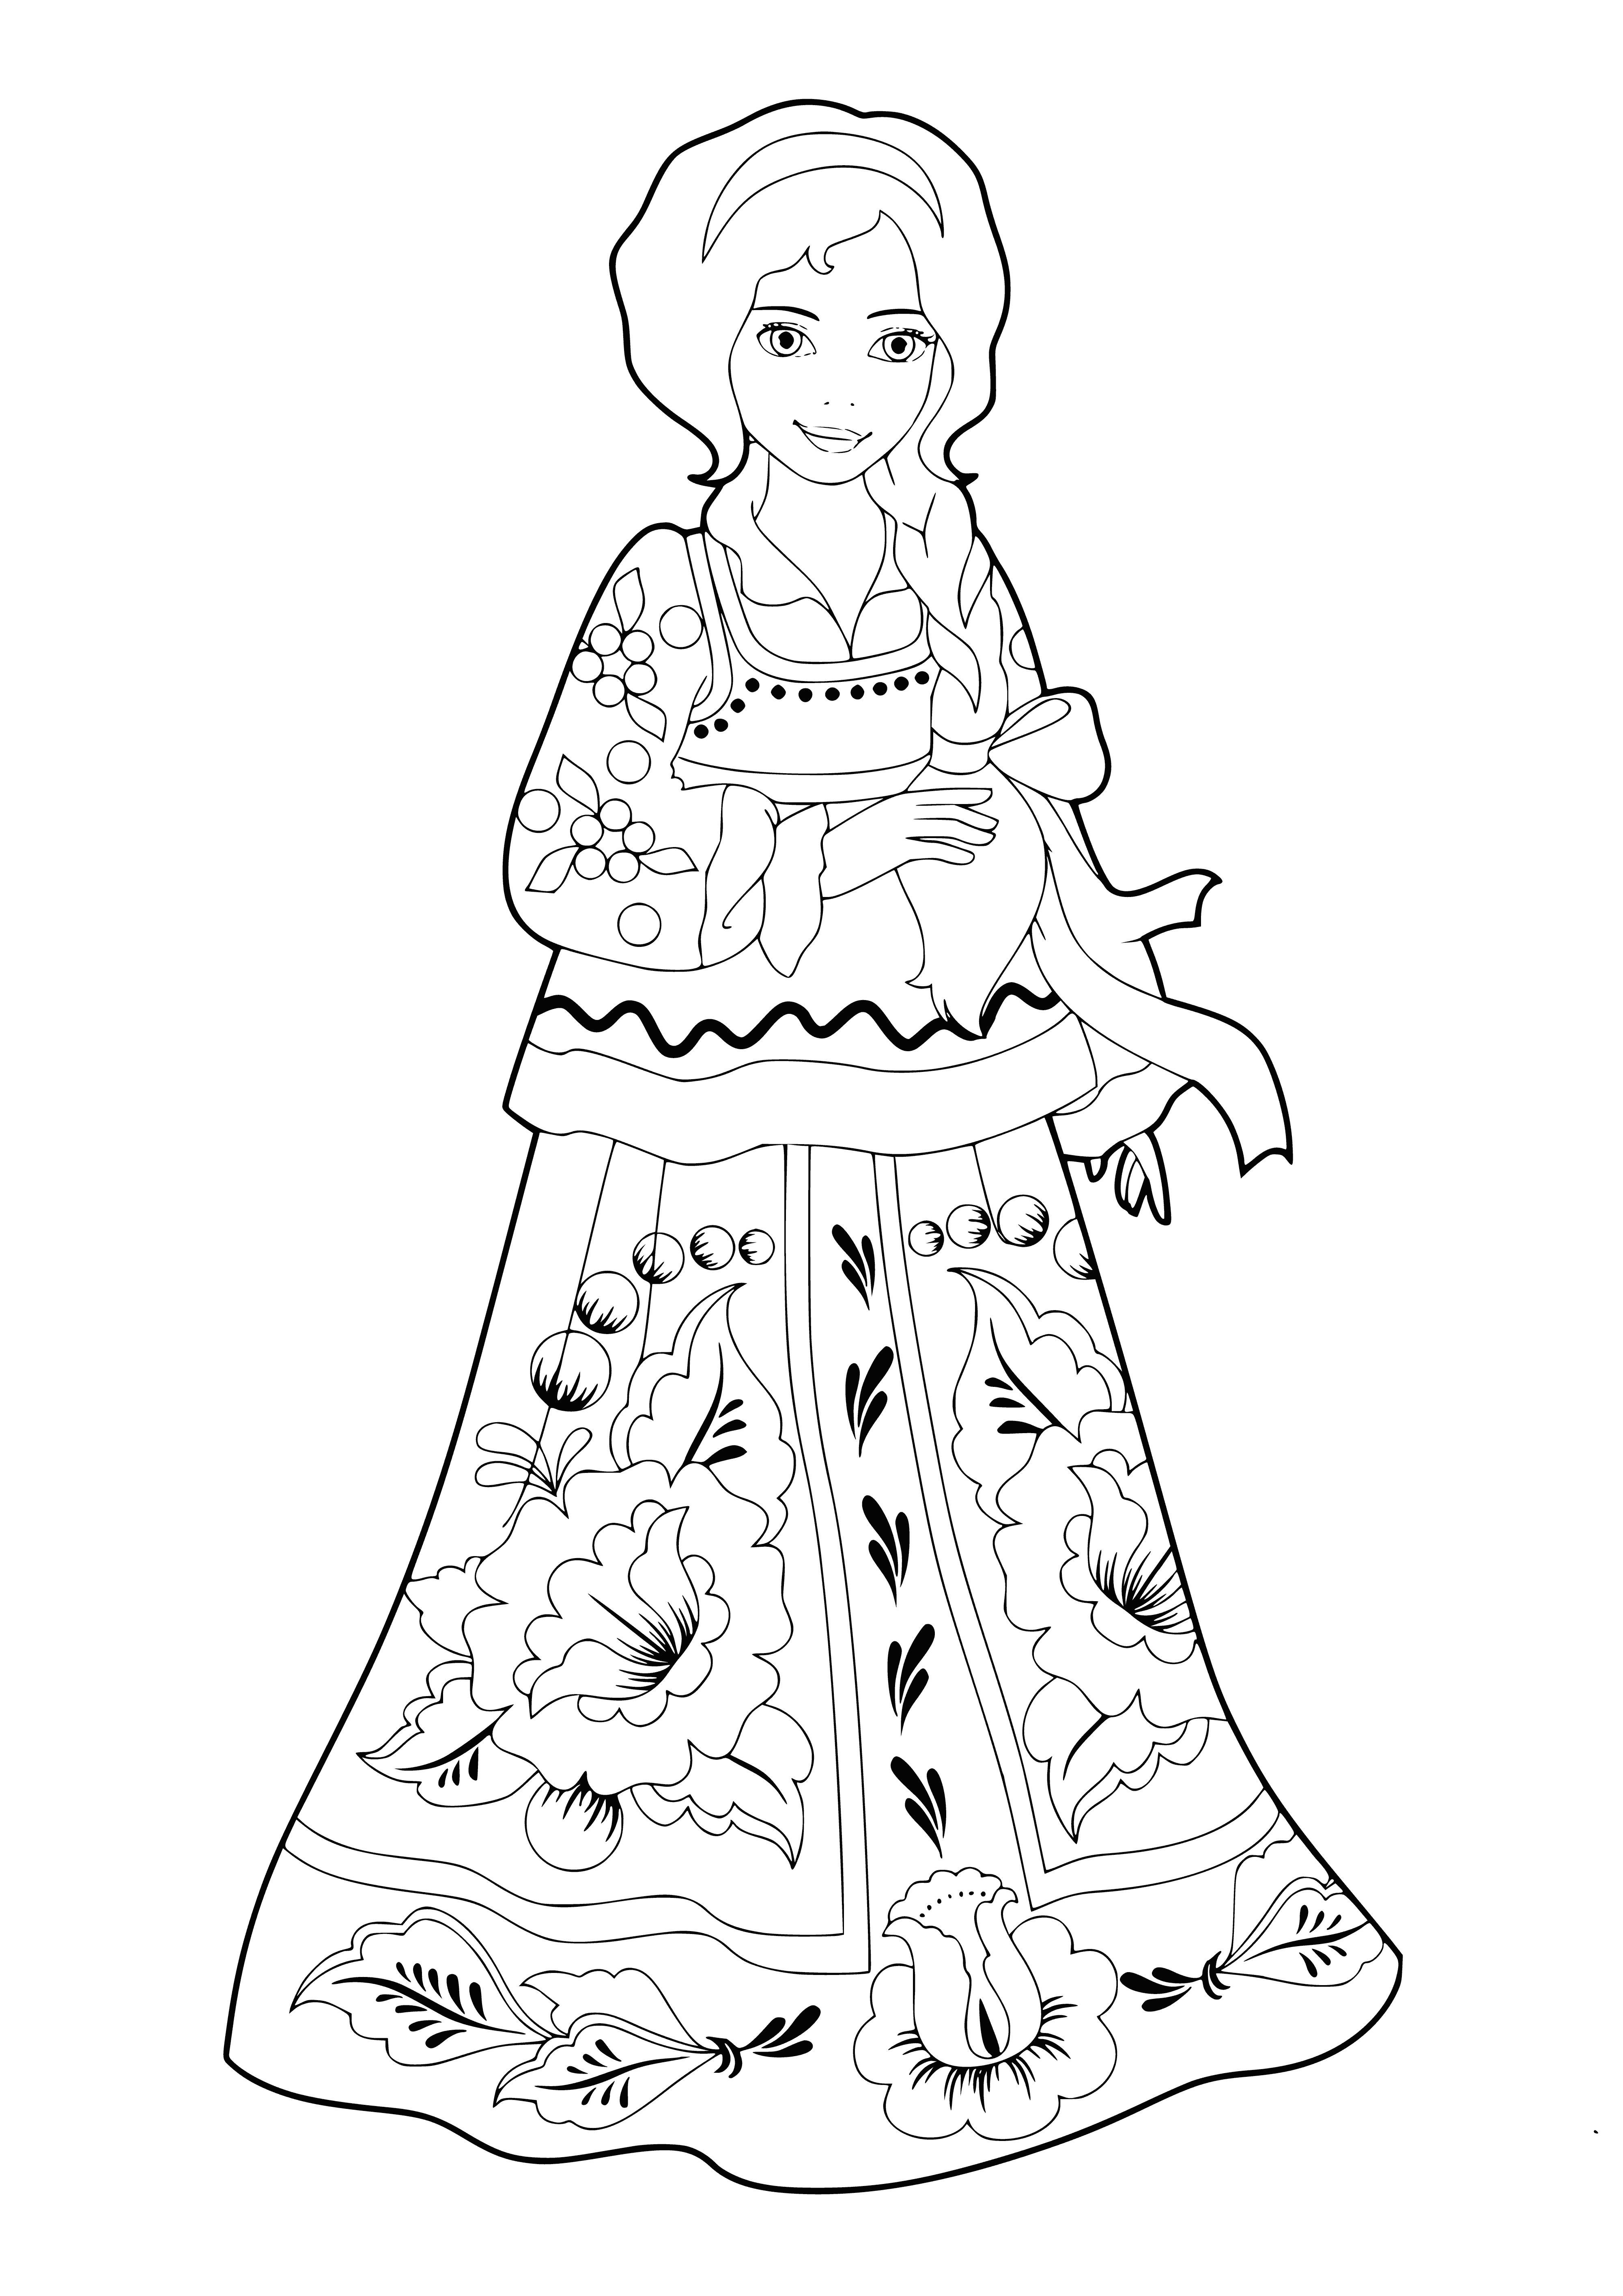 coloring page: Three Russian beauties wearing traditional clothing, holding flowers and smiling happily.